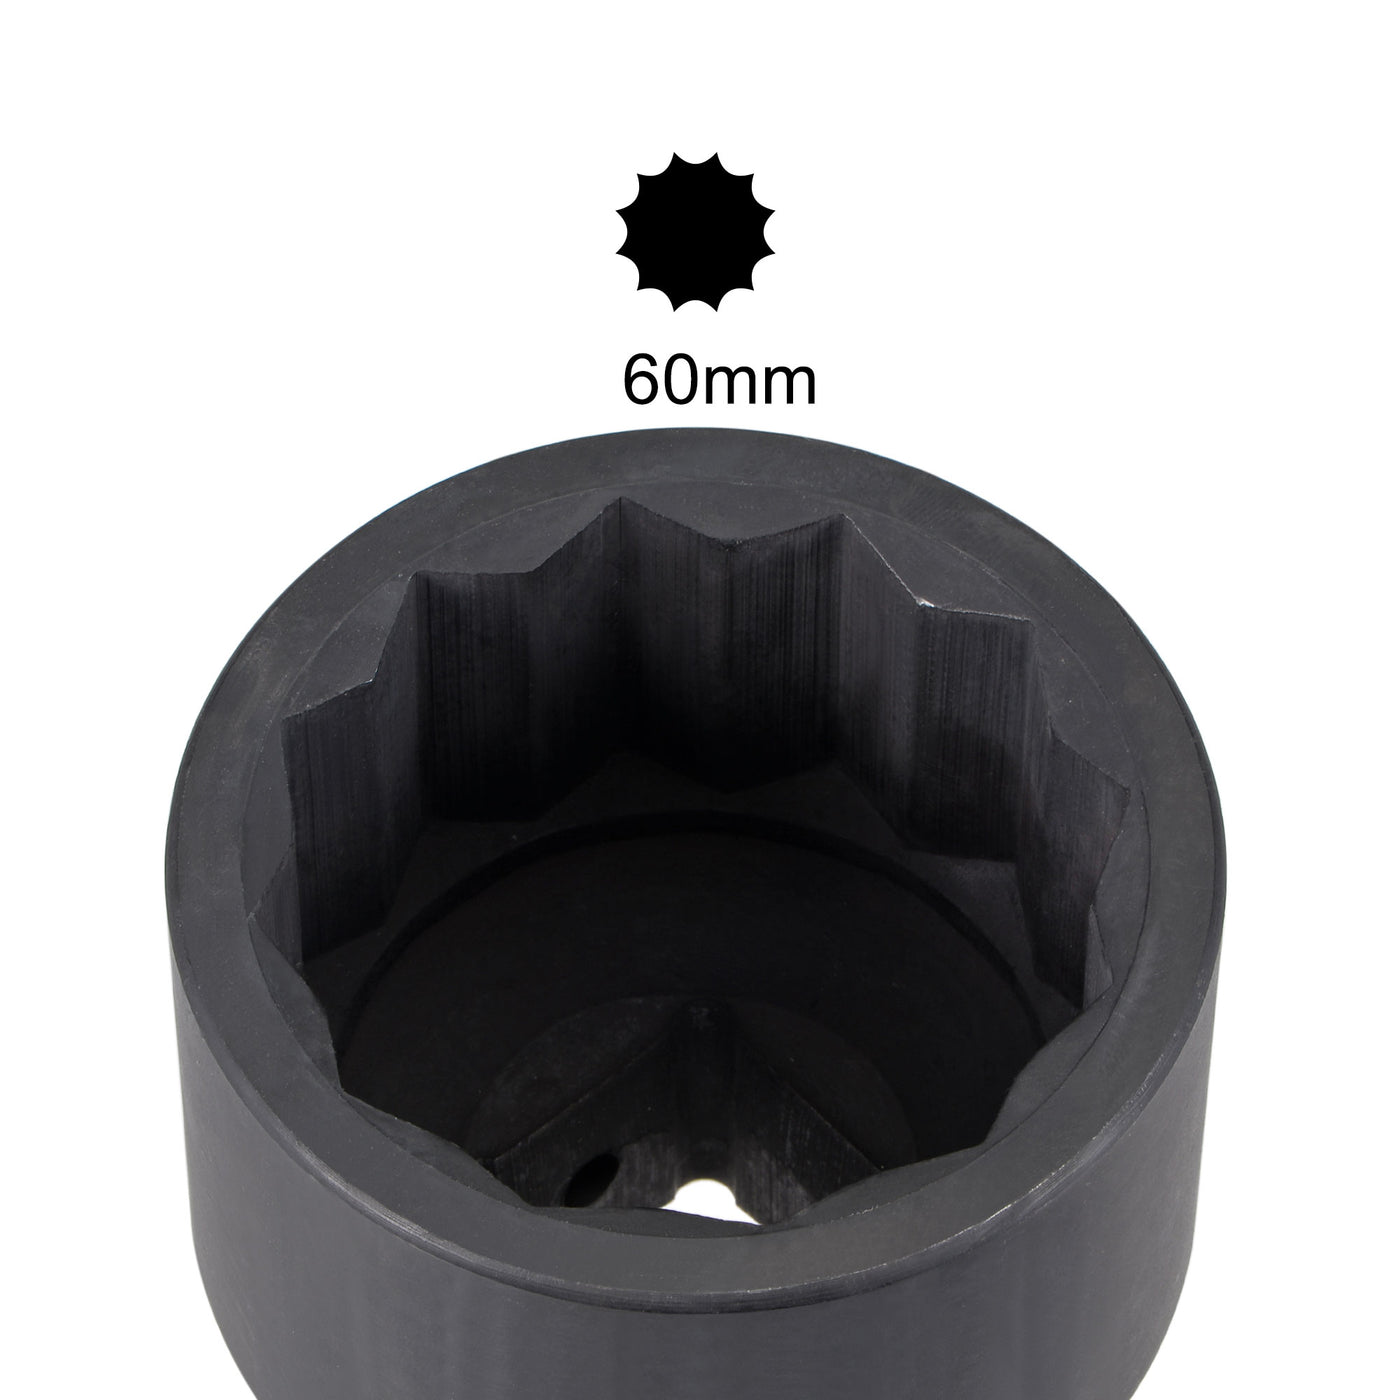 uxcell Uxcell 1-Inch Drive 60mm 12-Point Impact Socket, CR-MO Steel 84mm Length, Standard Metric Sizes